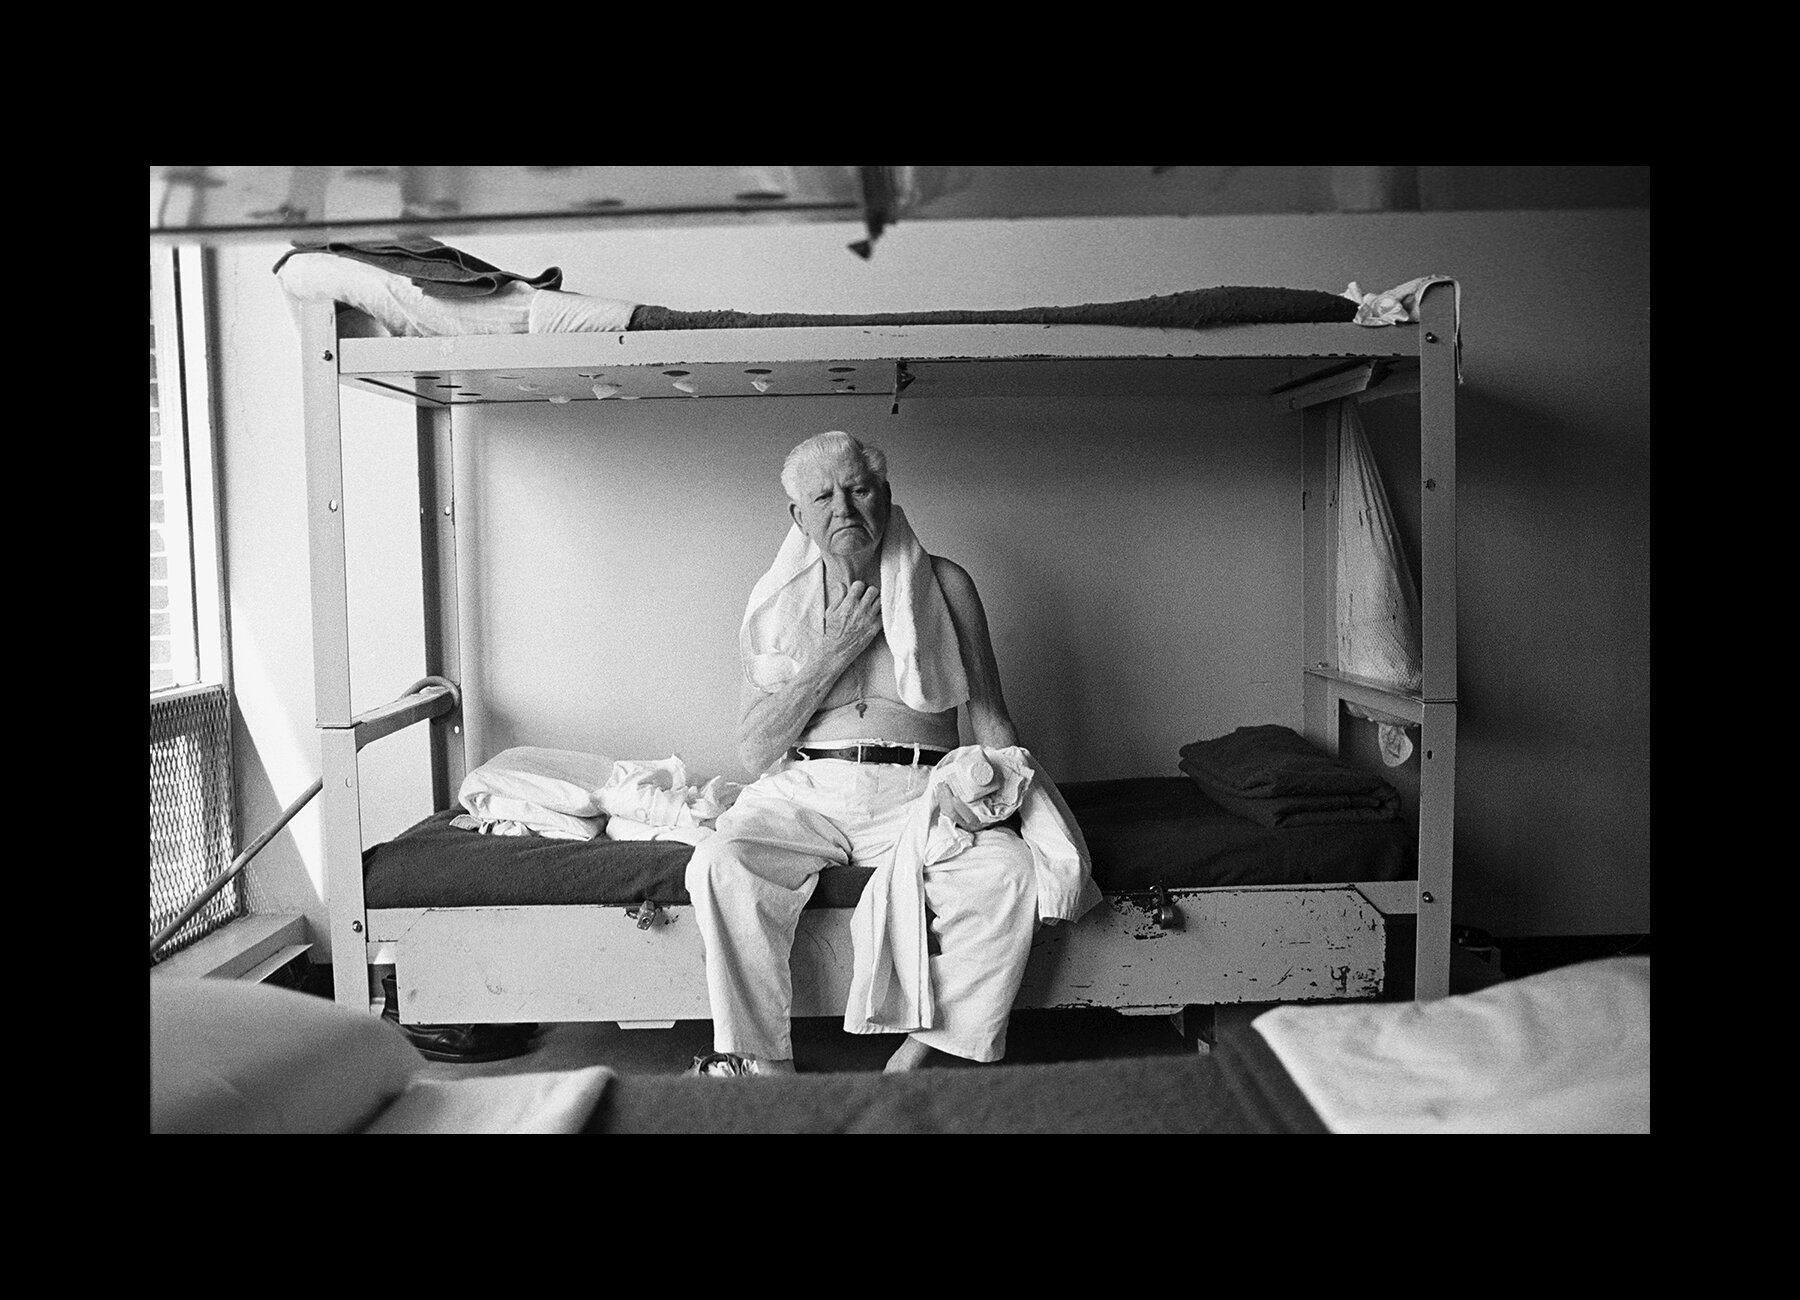  An inmate at the Hamilton Aged and Infirmed facility on his bunkbed, used because of overcrowding. Hamilton, Alabama. 1997 